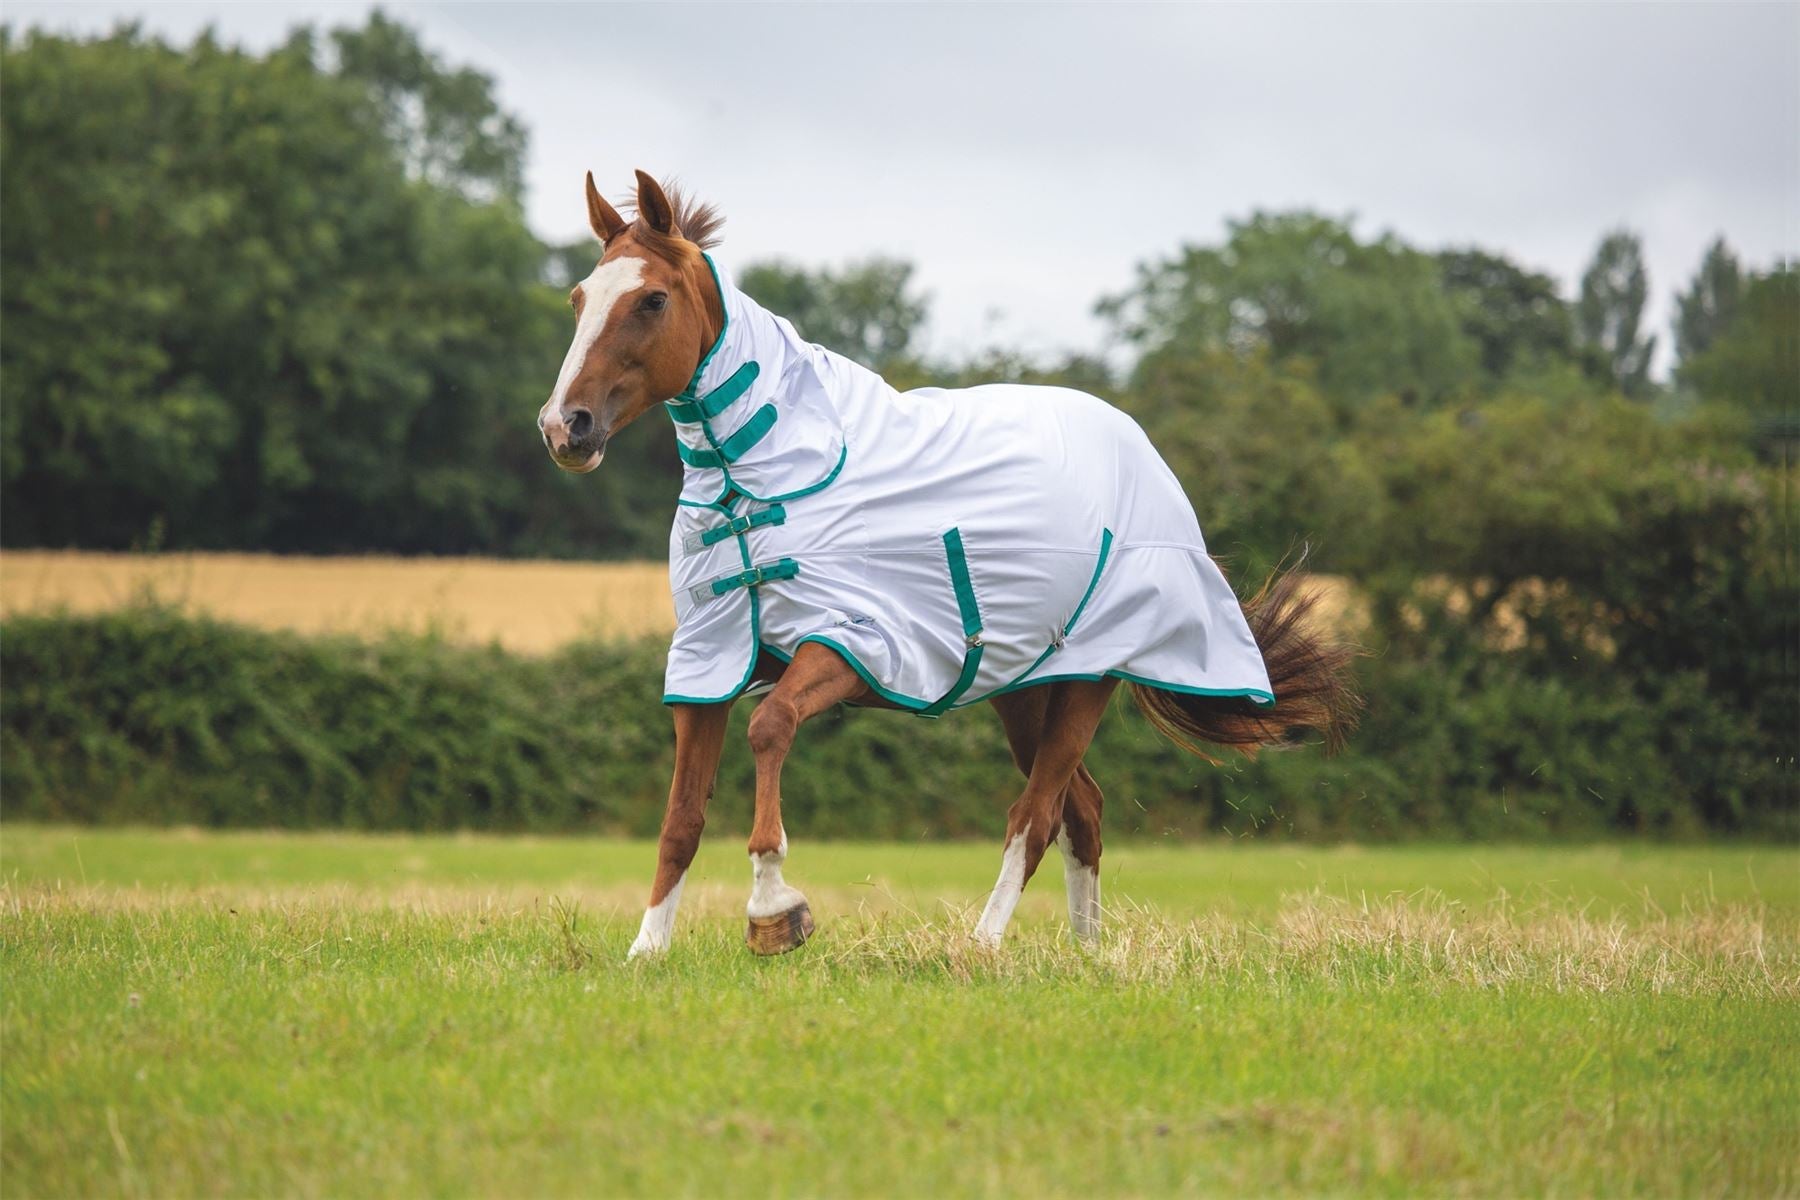 SHIRES TEMPEST FLY COMBO for optimal fit and comfort